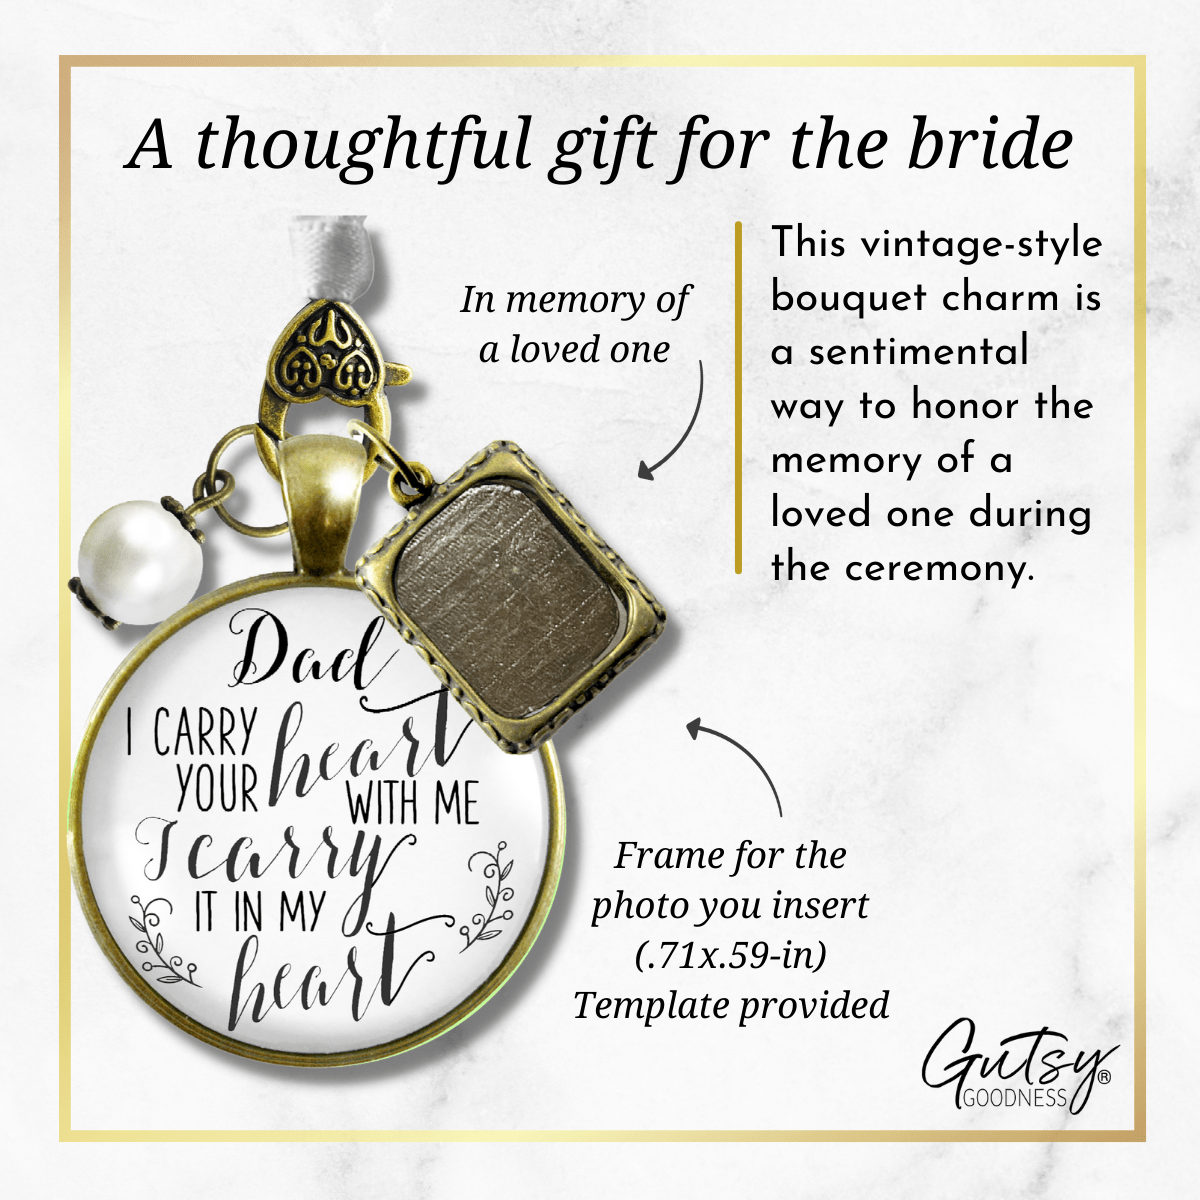 Photo Bouquet Charm Dad I Carry Your Memorial Jewelry Gift Bride's Father Wedding - Gutsy Goodness Handmade Jewelry Gifts